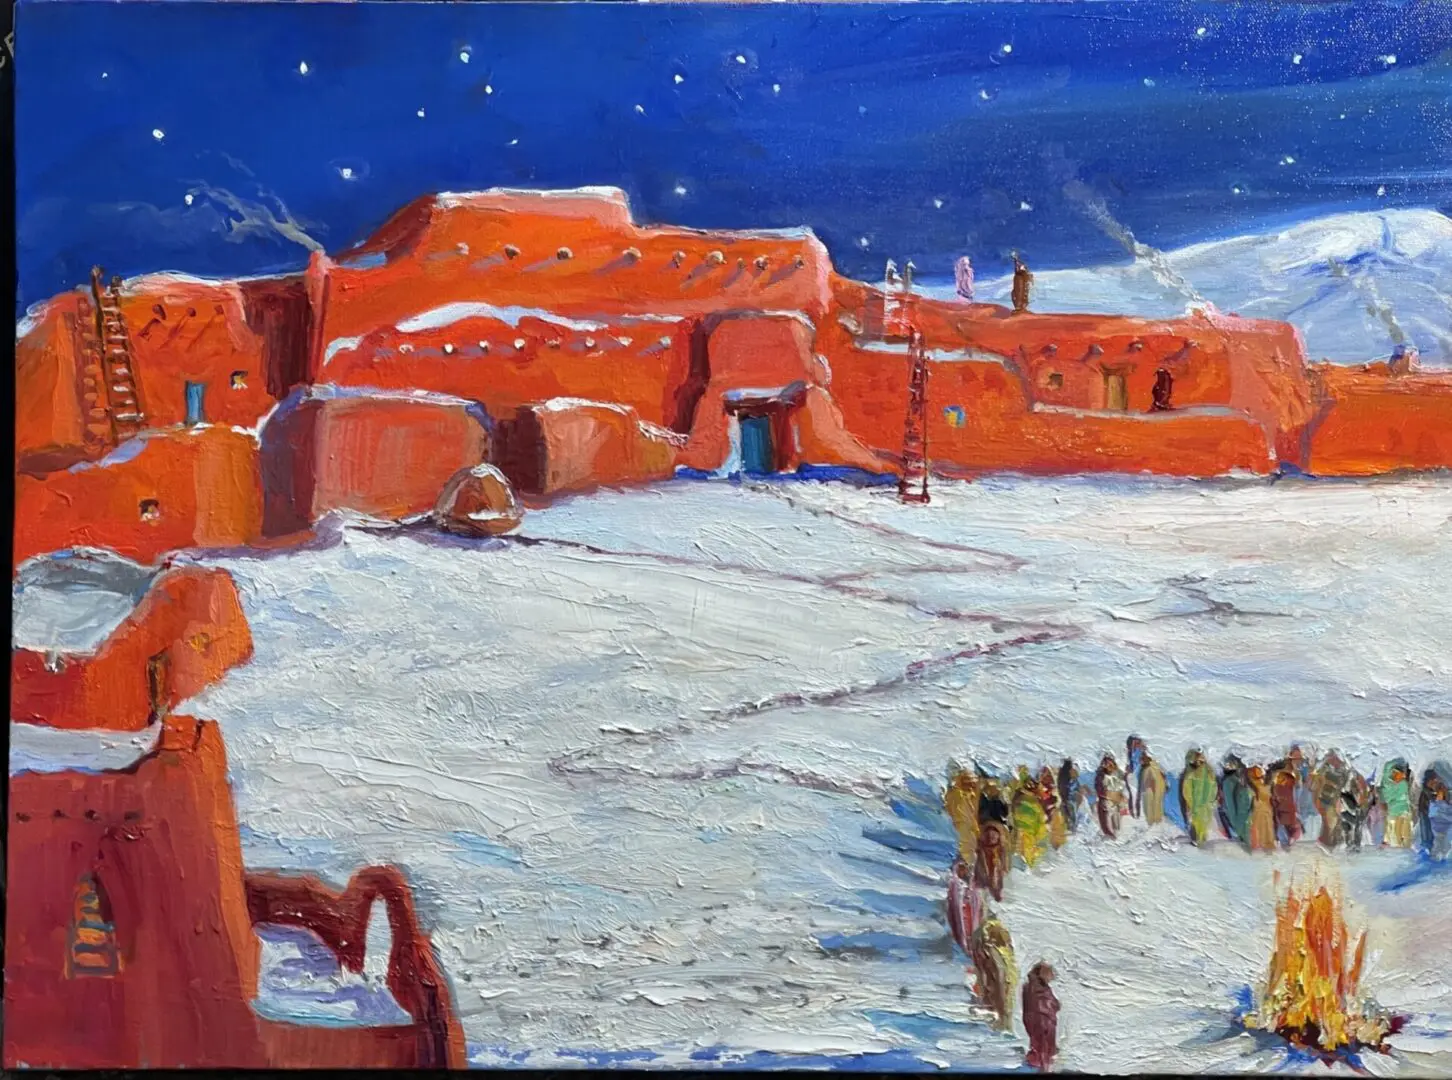 A painting of a red building in the snow.